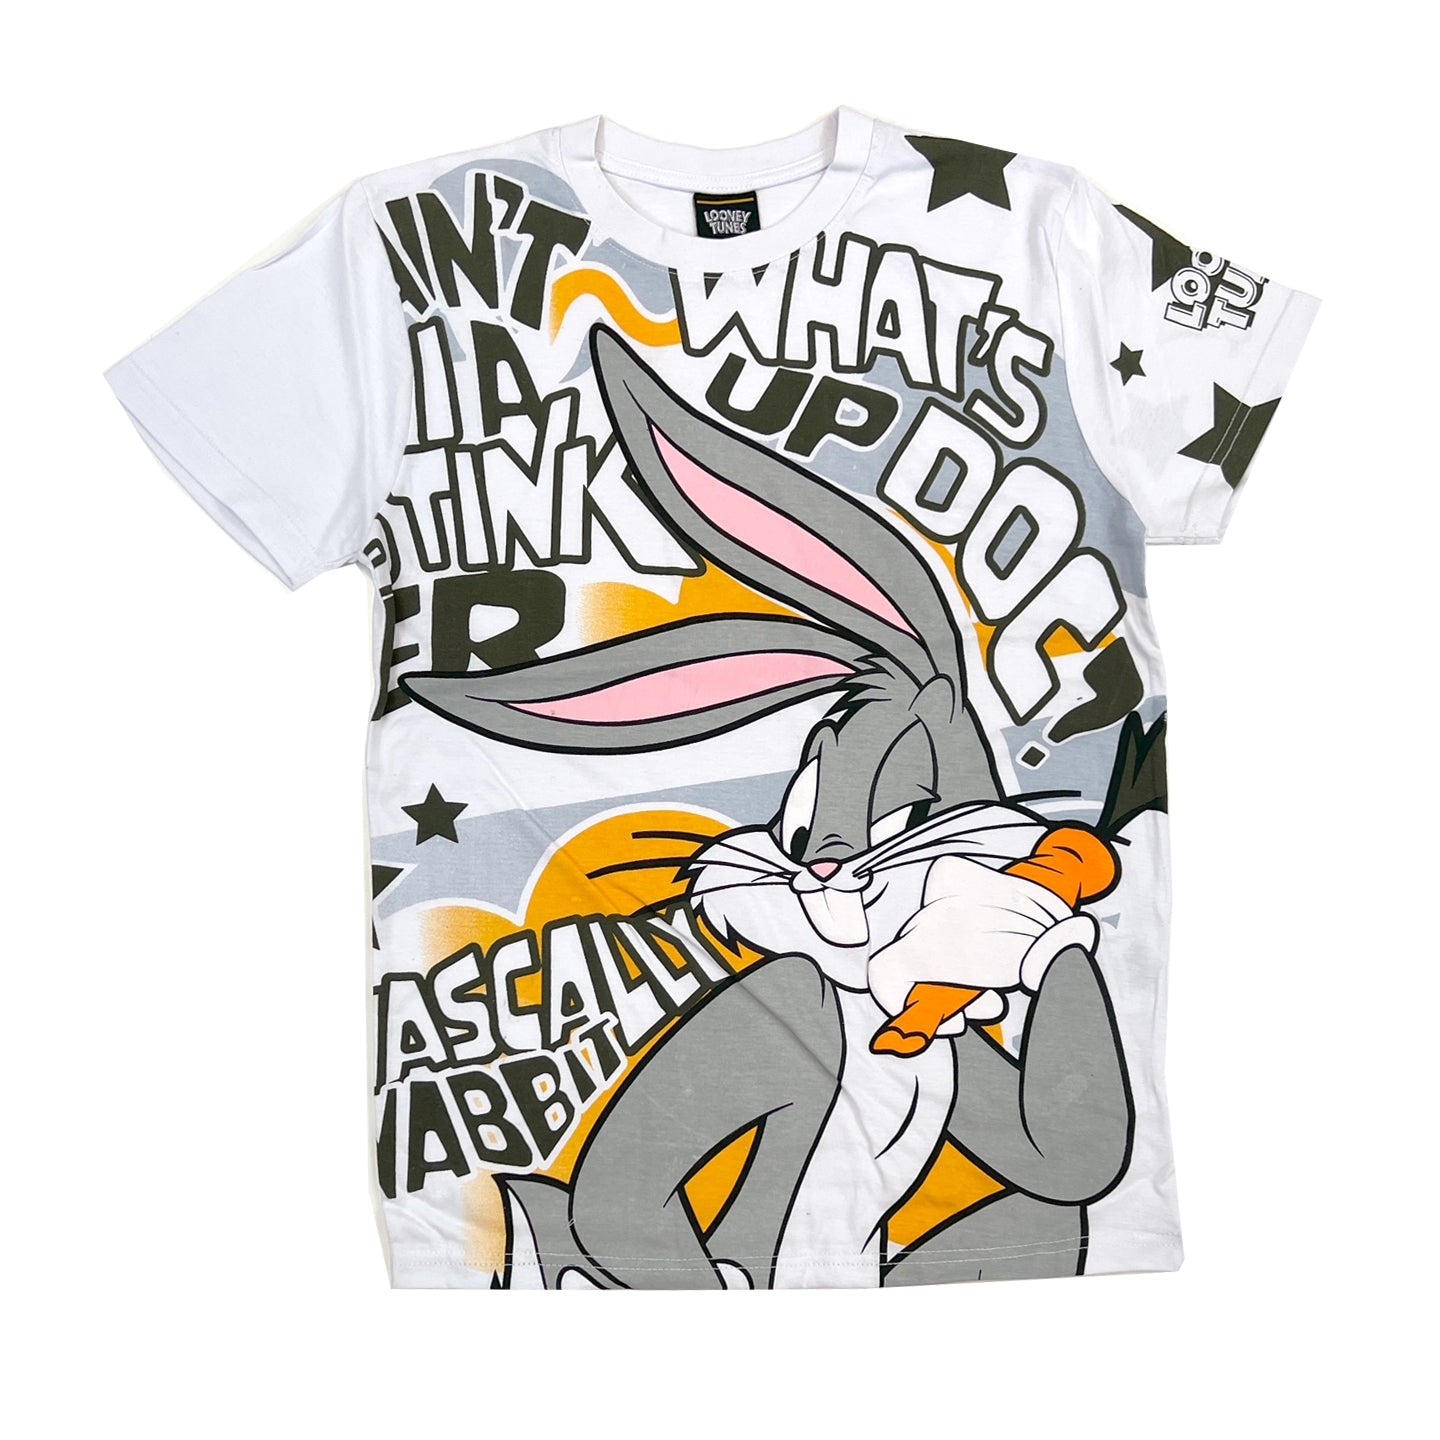 $16.99 Tunes 2 Bunny Tee (White) for Looney $30 Bugs /